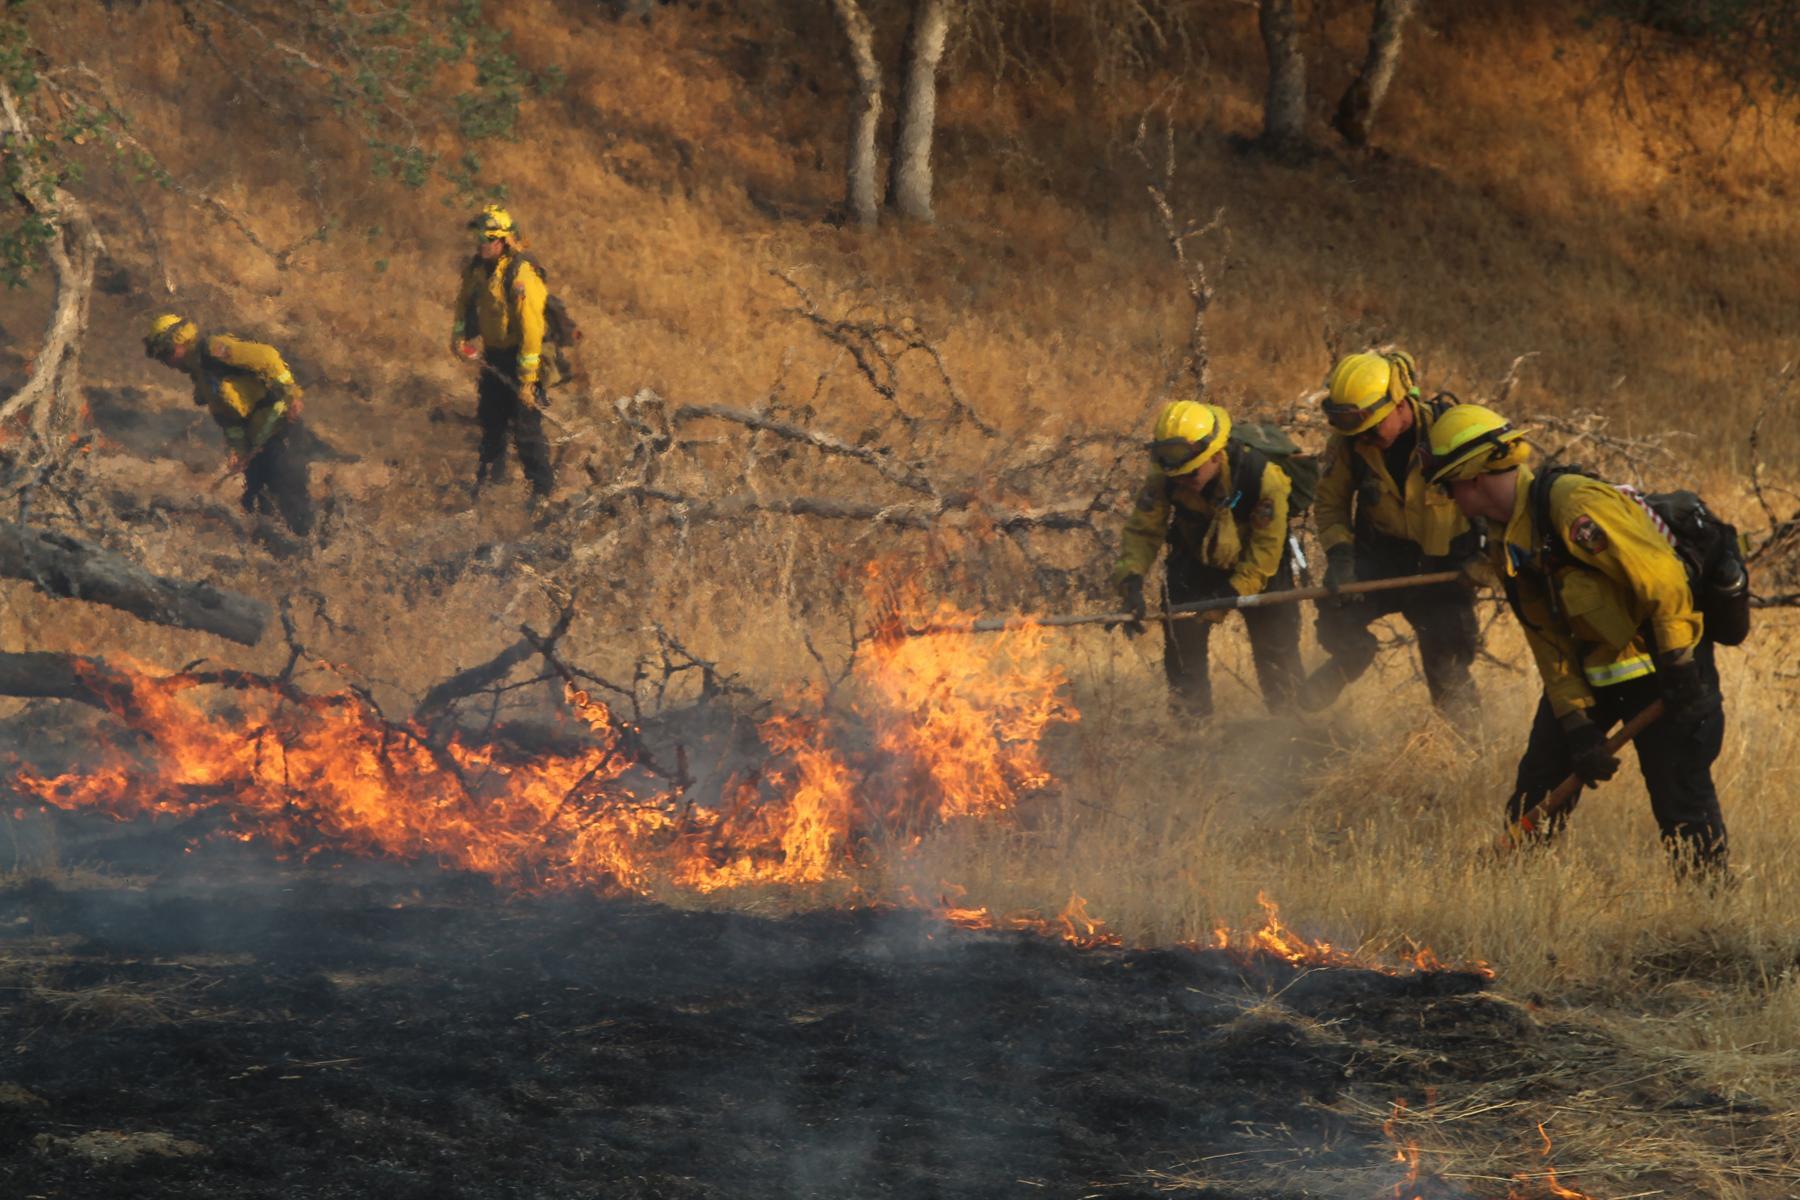 Firefighters construct handline to stop the fire's spread on the southwest flank near Deer Creek Road.